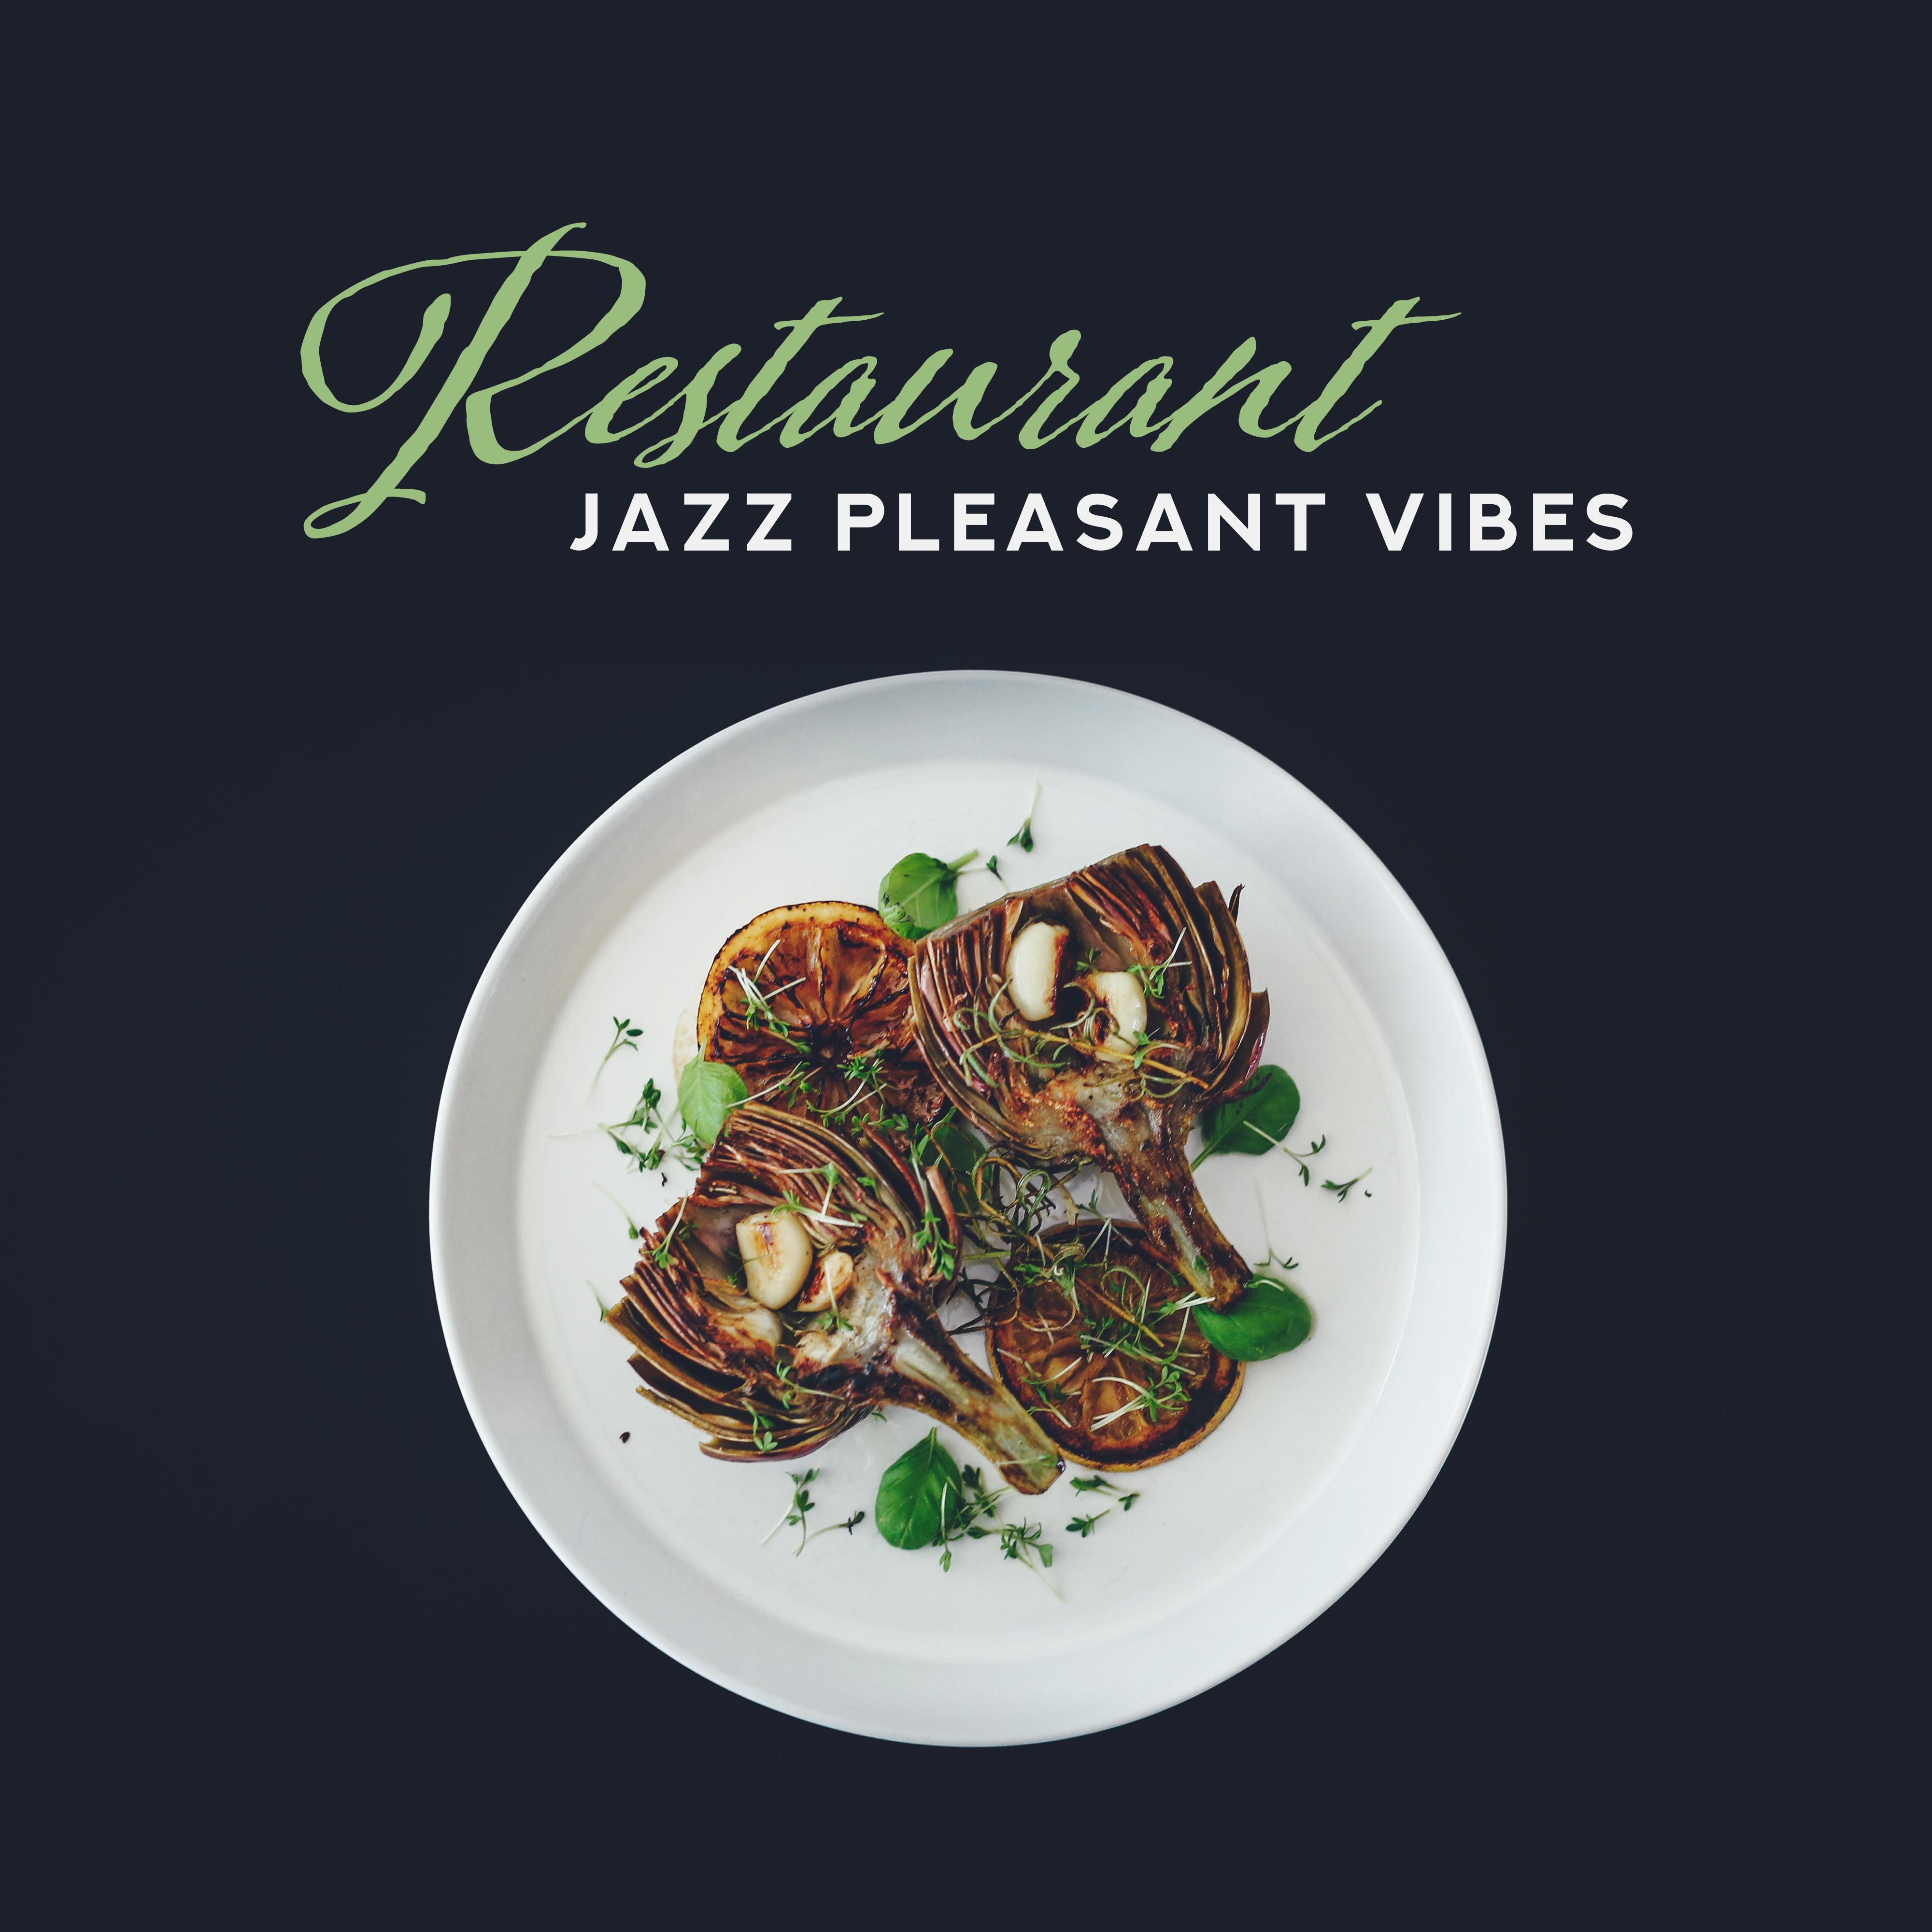 Restaurant Jazz Pleasant Vibes: Smooth Instrumental Jazz 2019 Music, Compilation of Perfect Tracks for Restaurant’s Background, Dinner or Lunch Songs